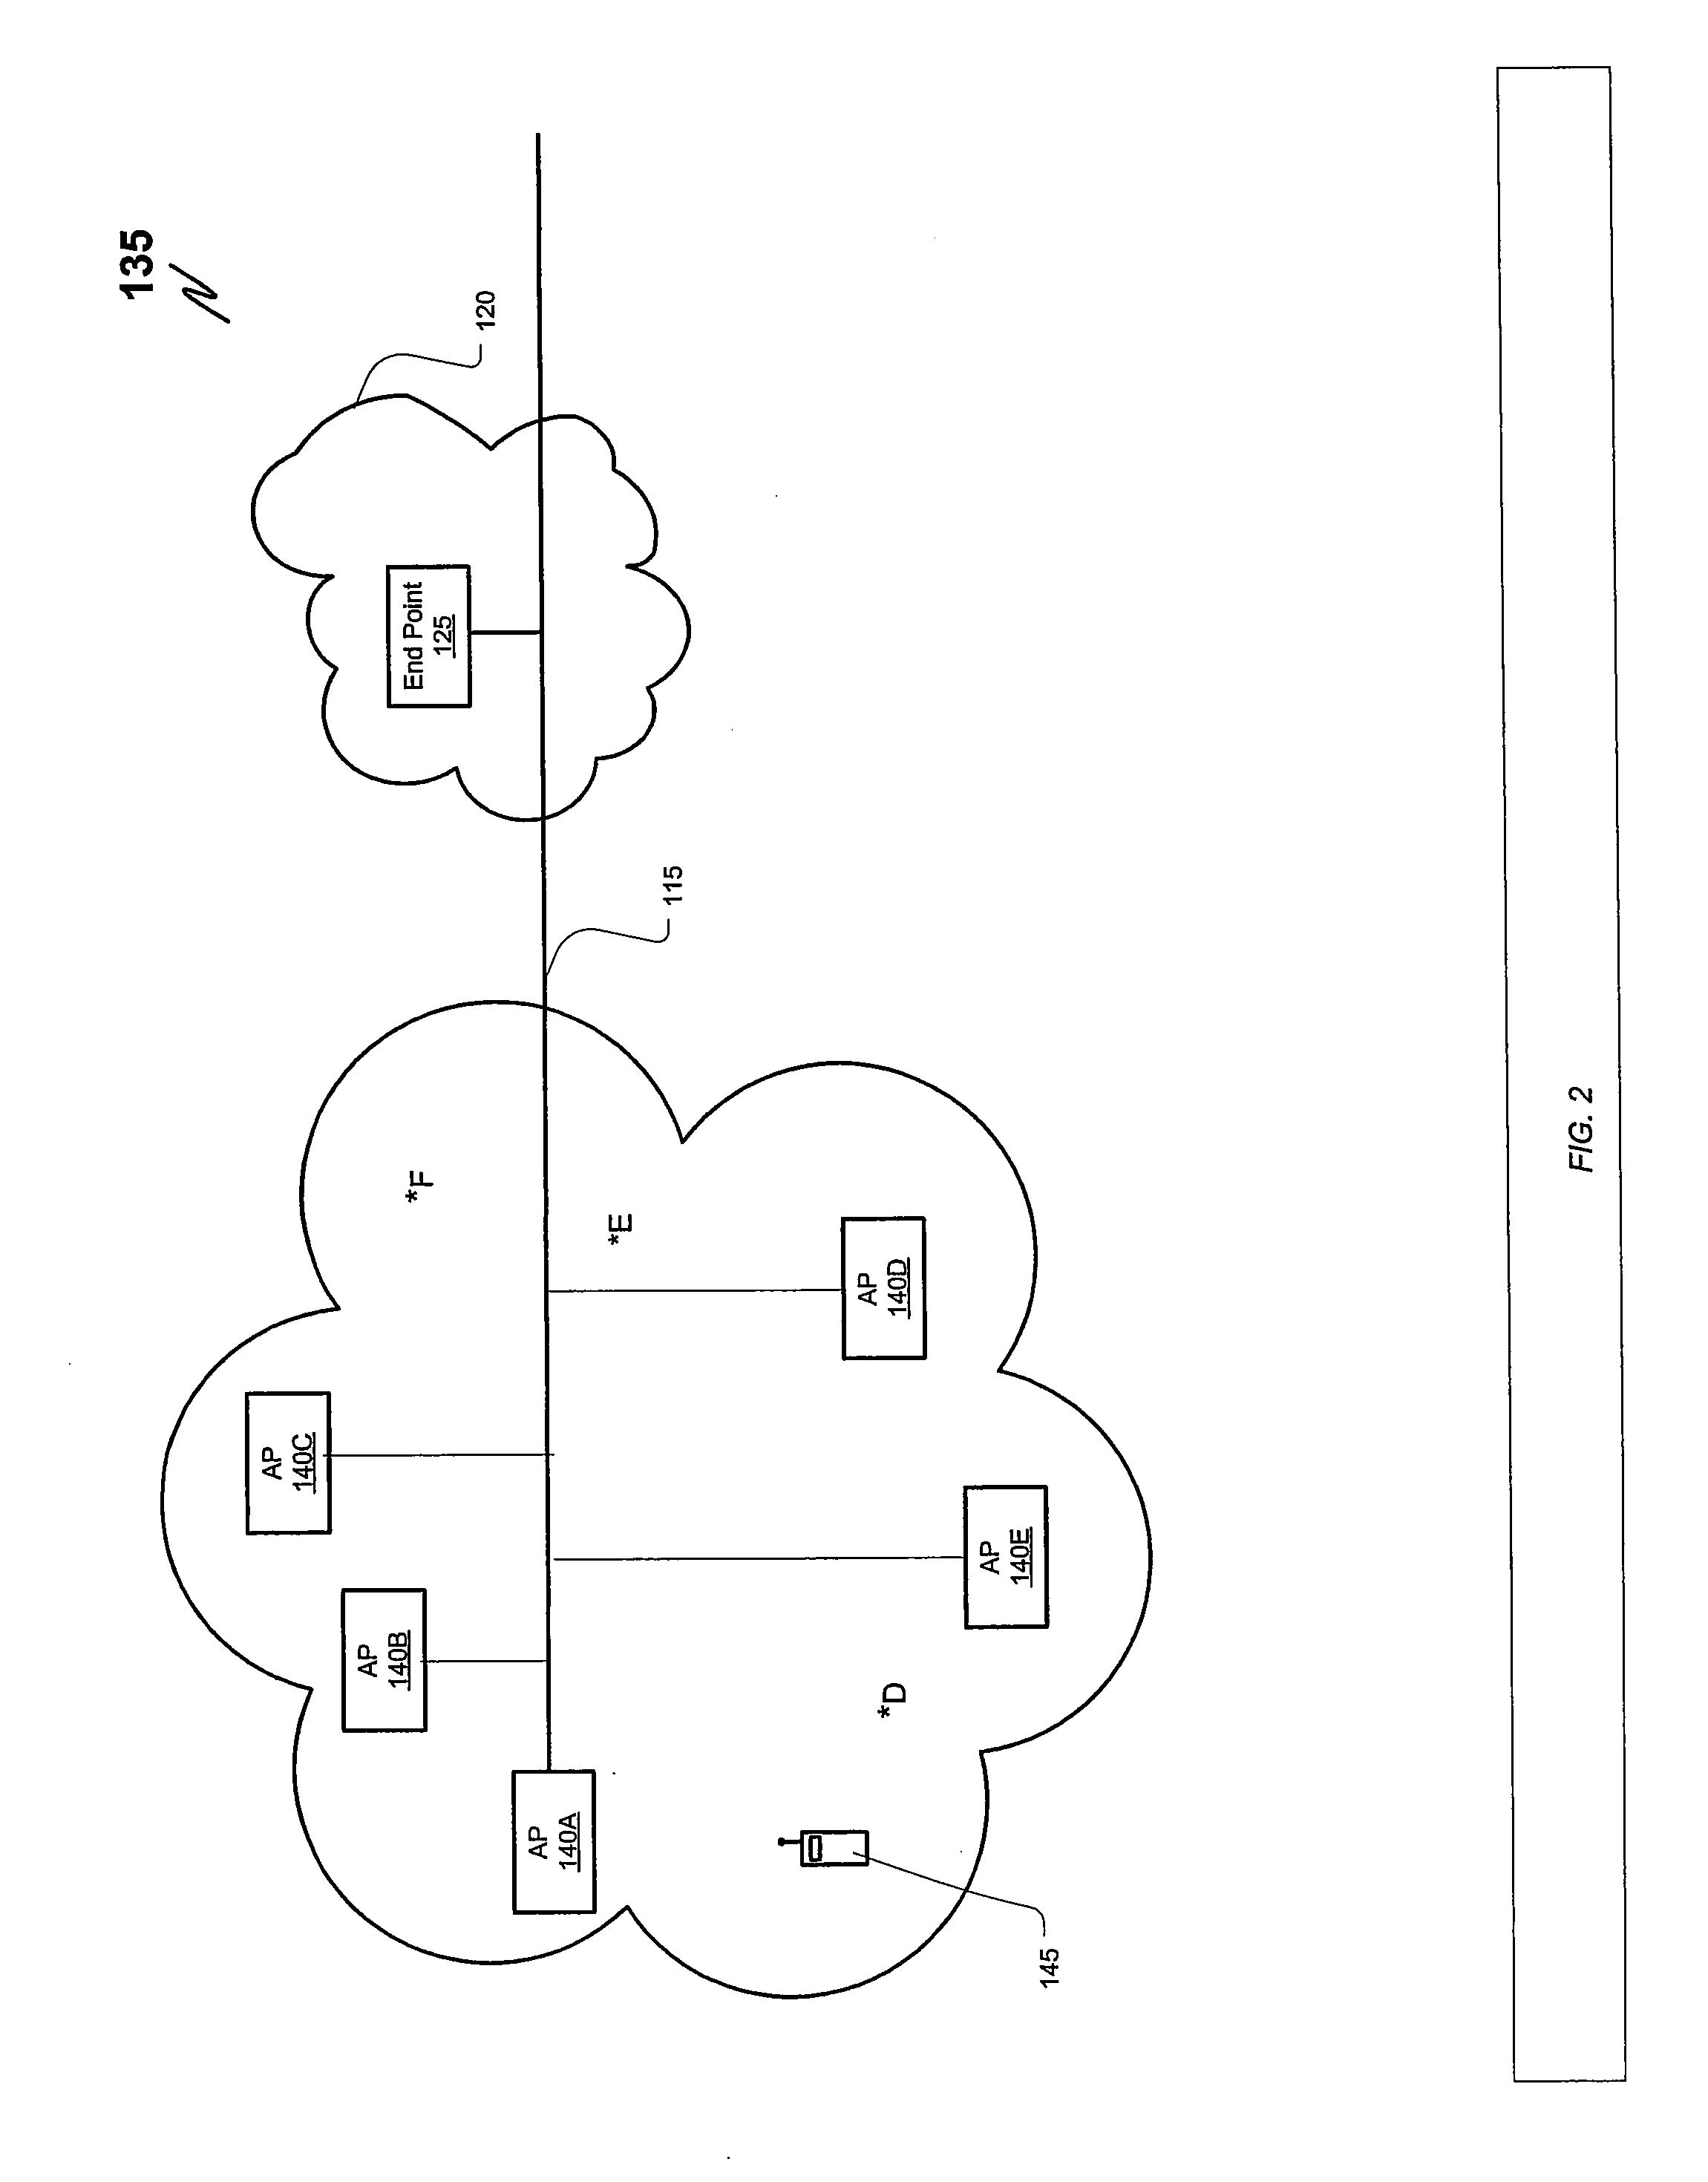 Method and apparatus for distributing data to a mobile device using plural access points